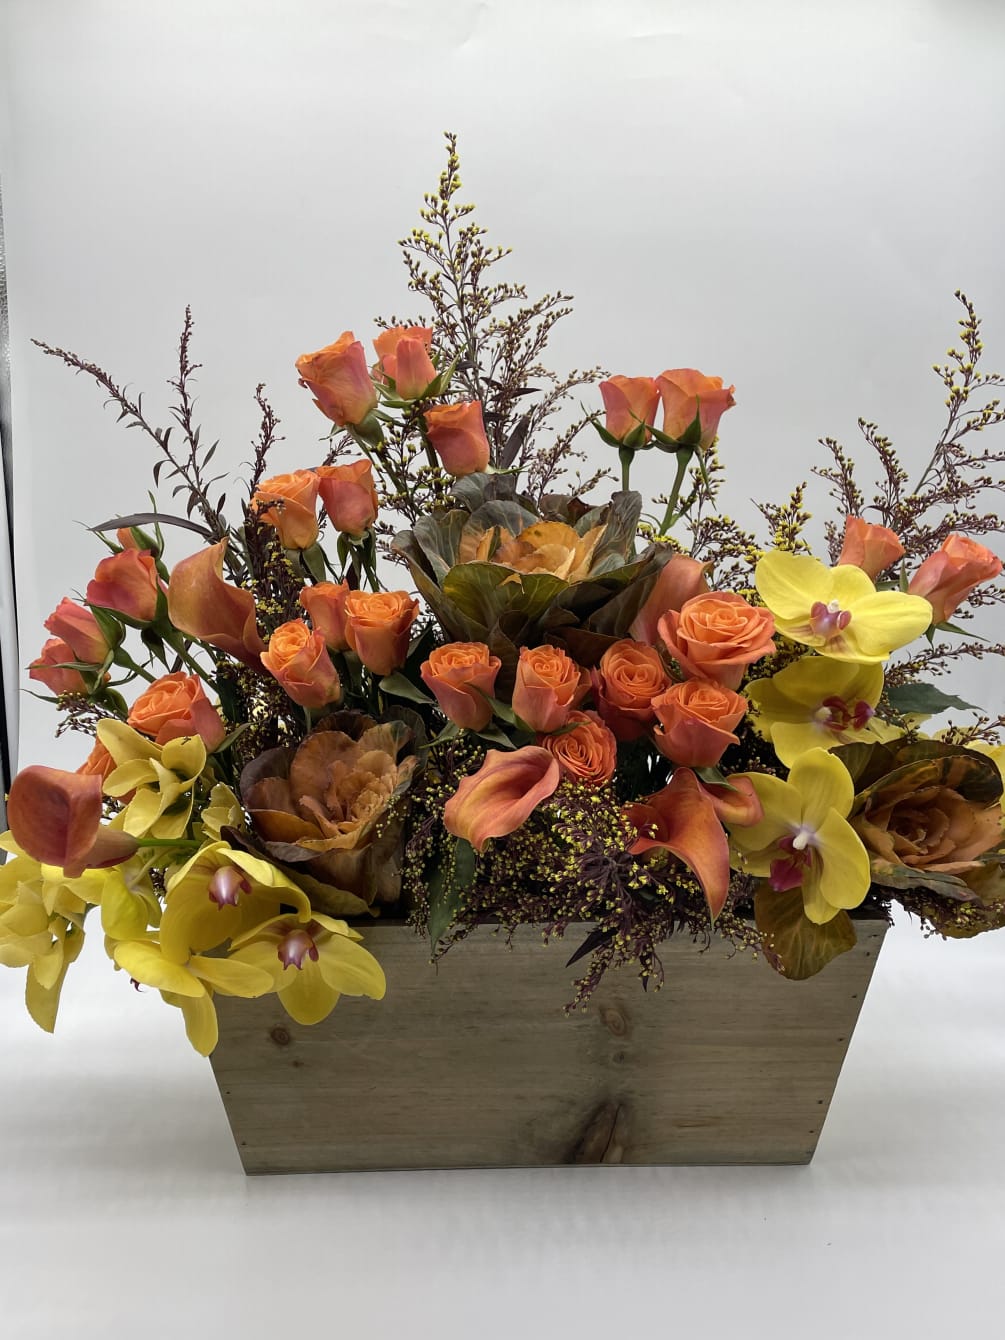 A Beautiful combination of orange roses mixed with calla lilies and bright